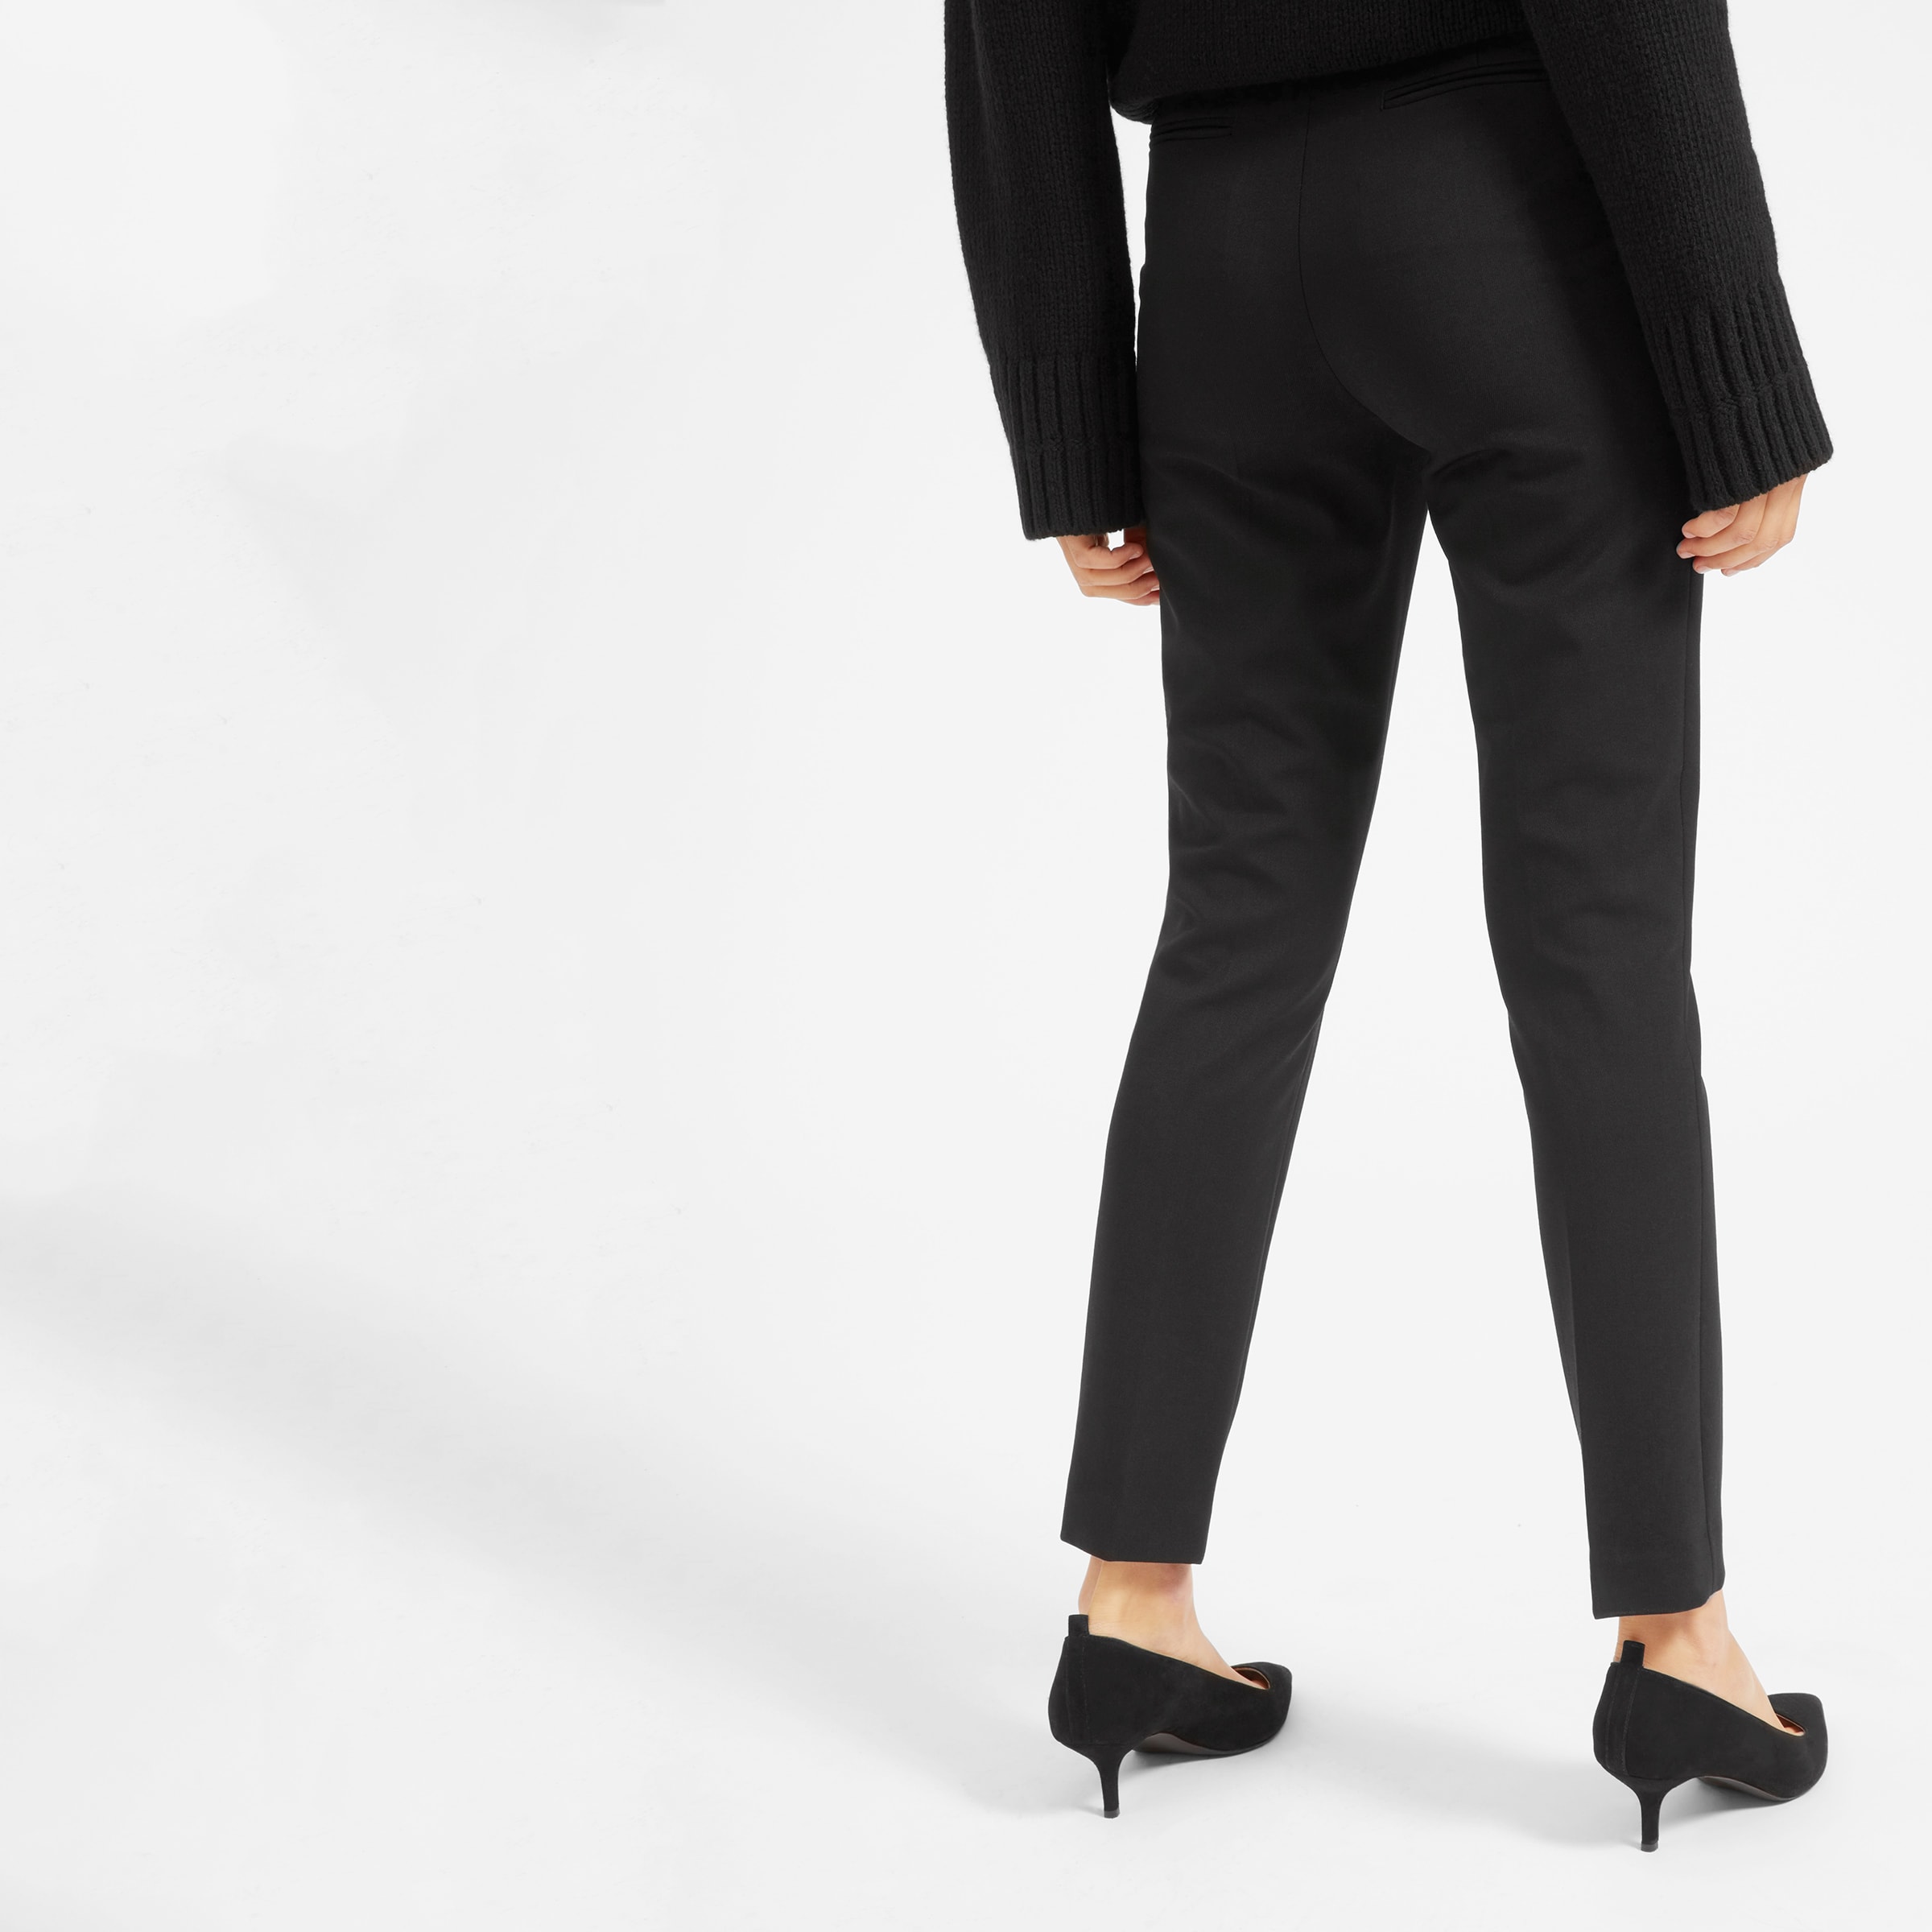 10 Black Dress Pants Outfits for Women to Wear to Work